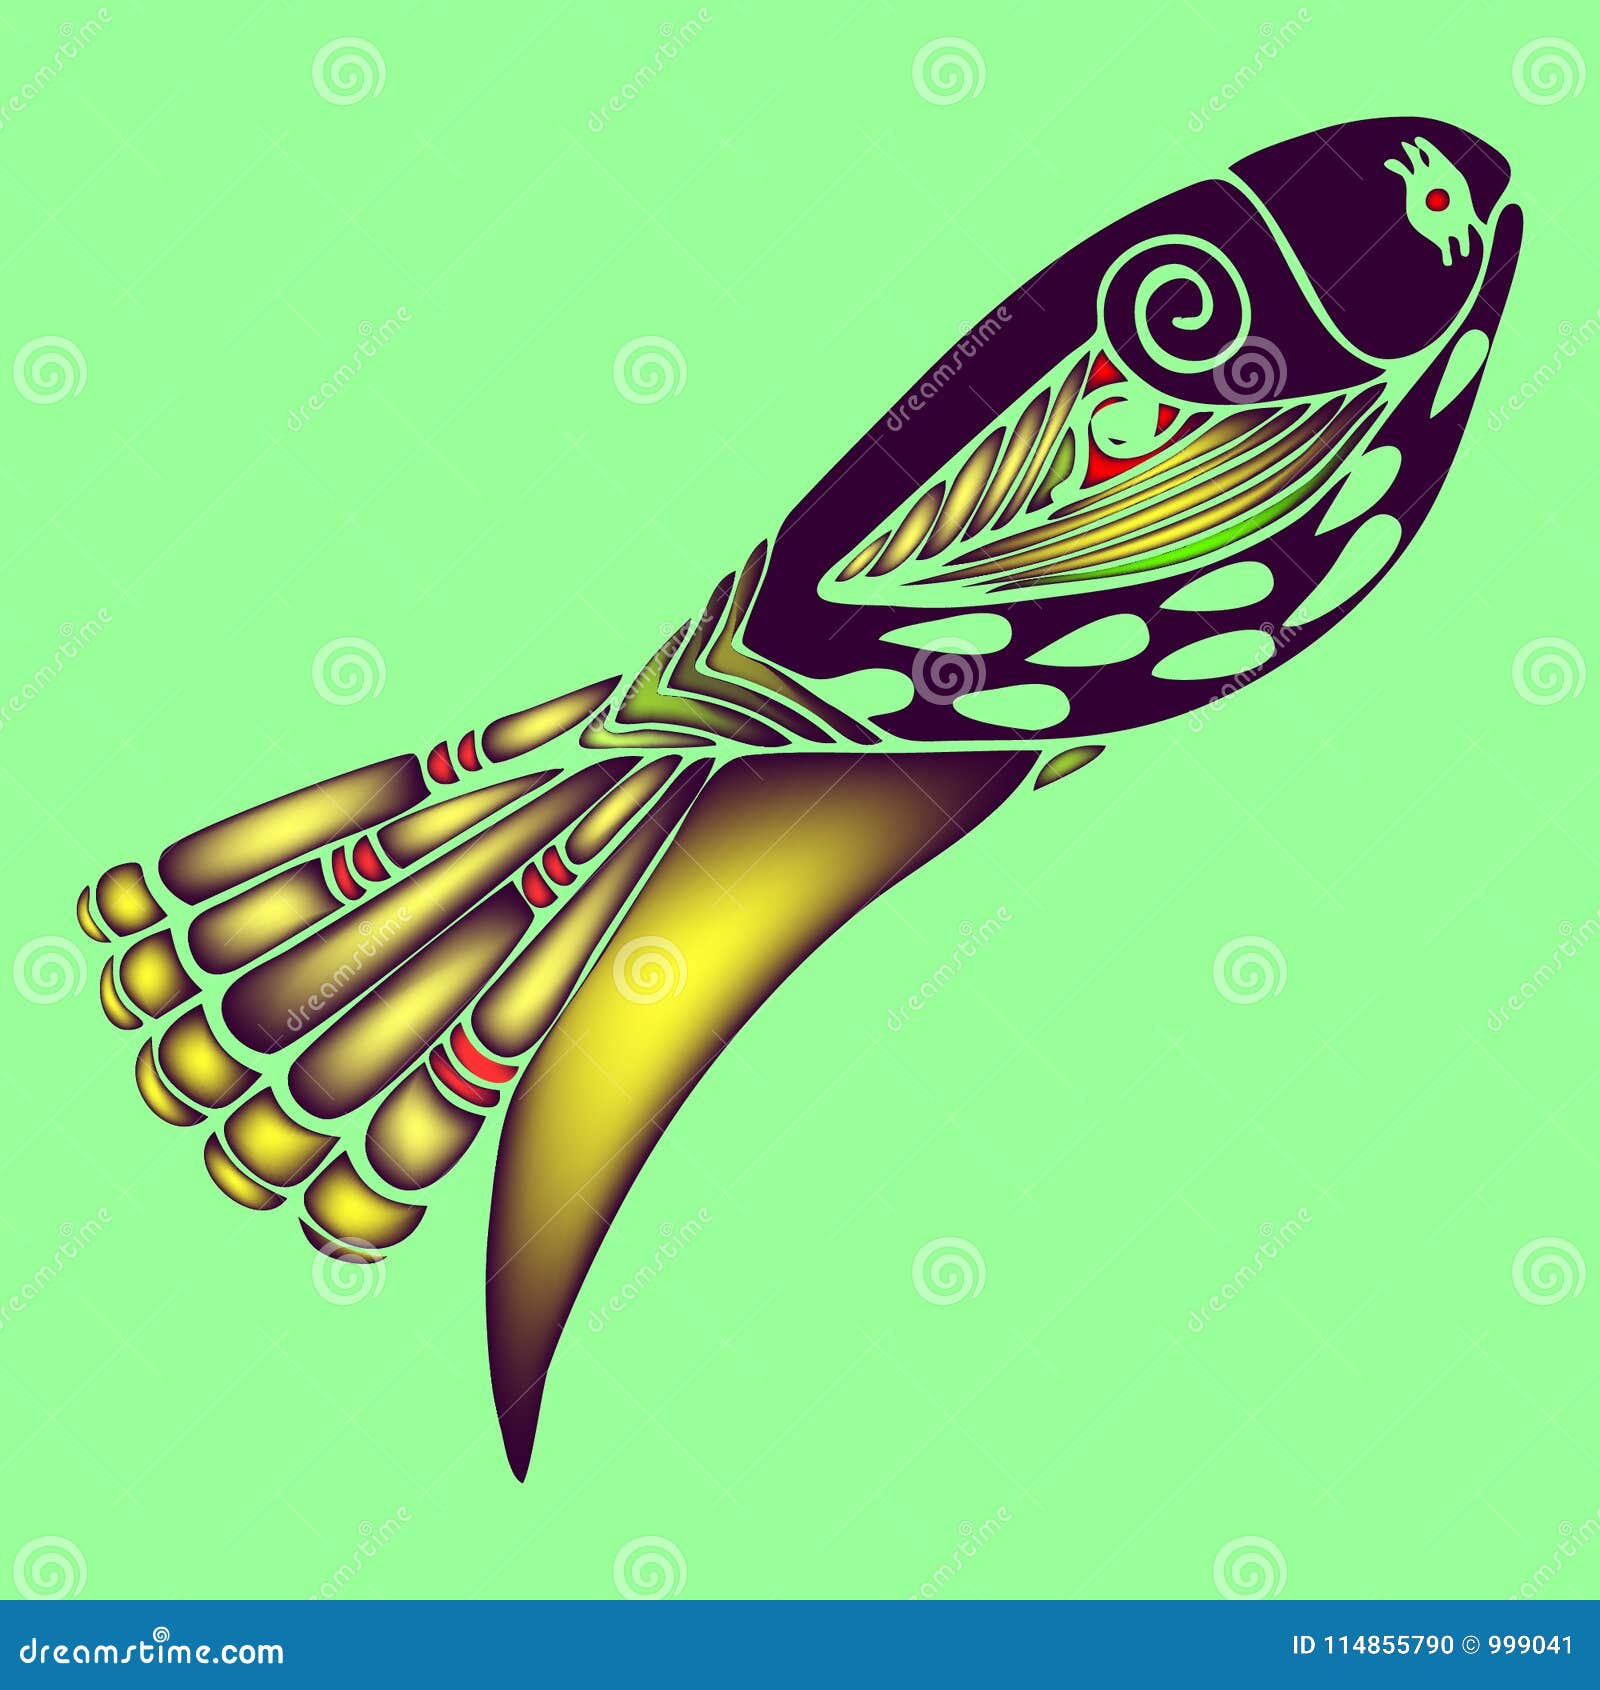 Download Decorative Colored Fish 3d Vector Illustration Eps10 Stock ...